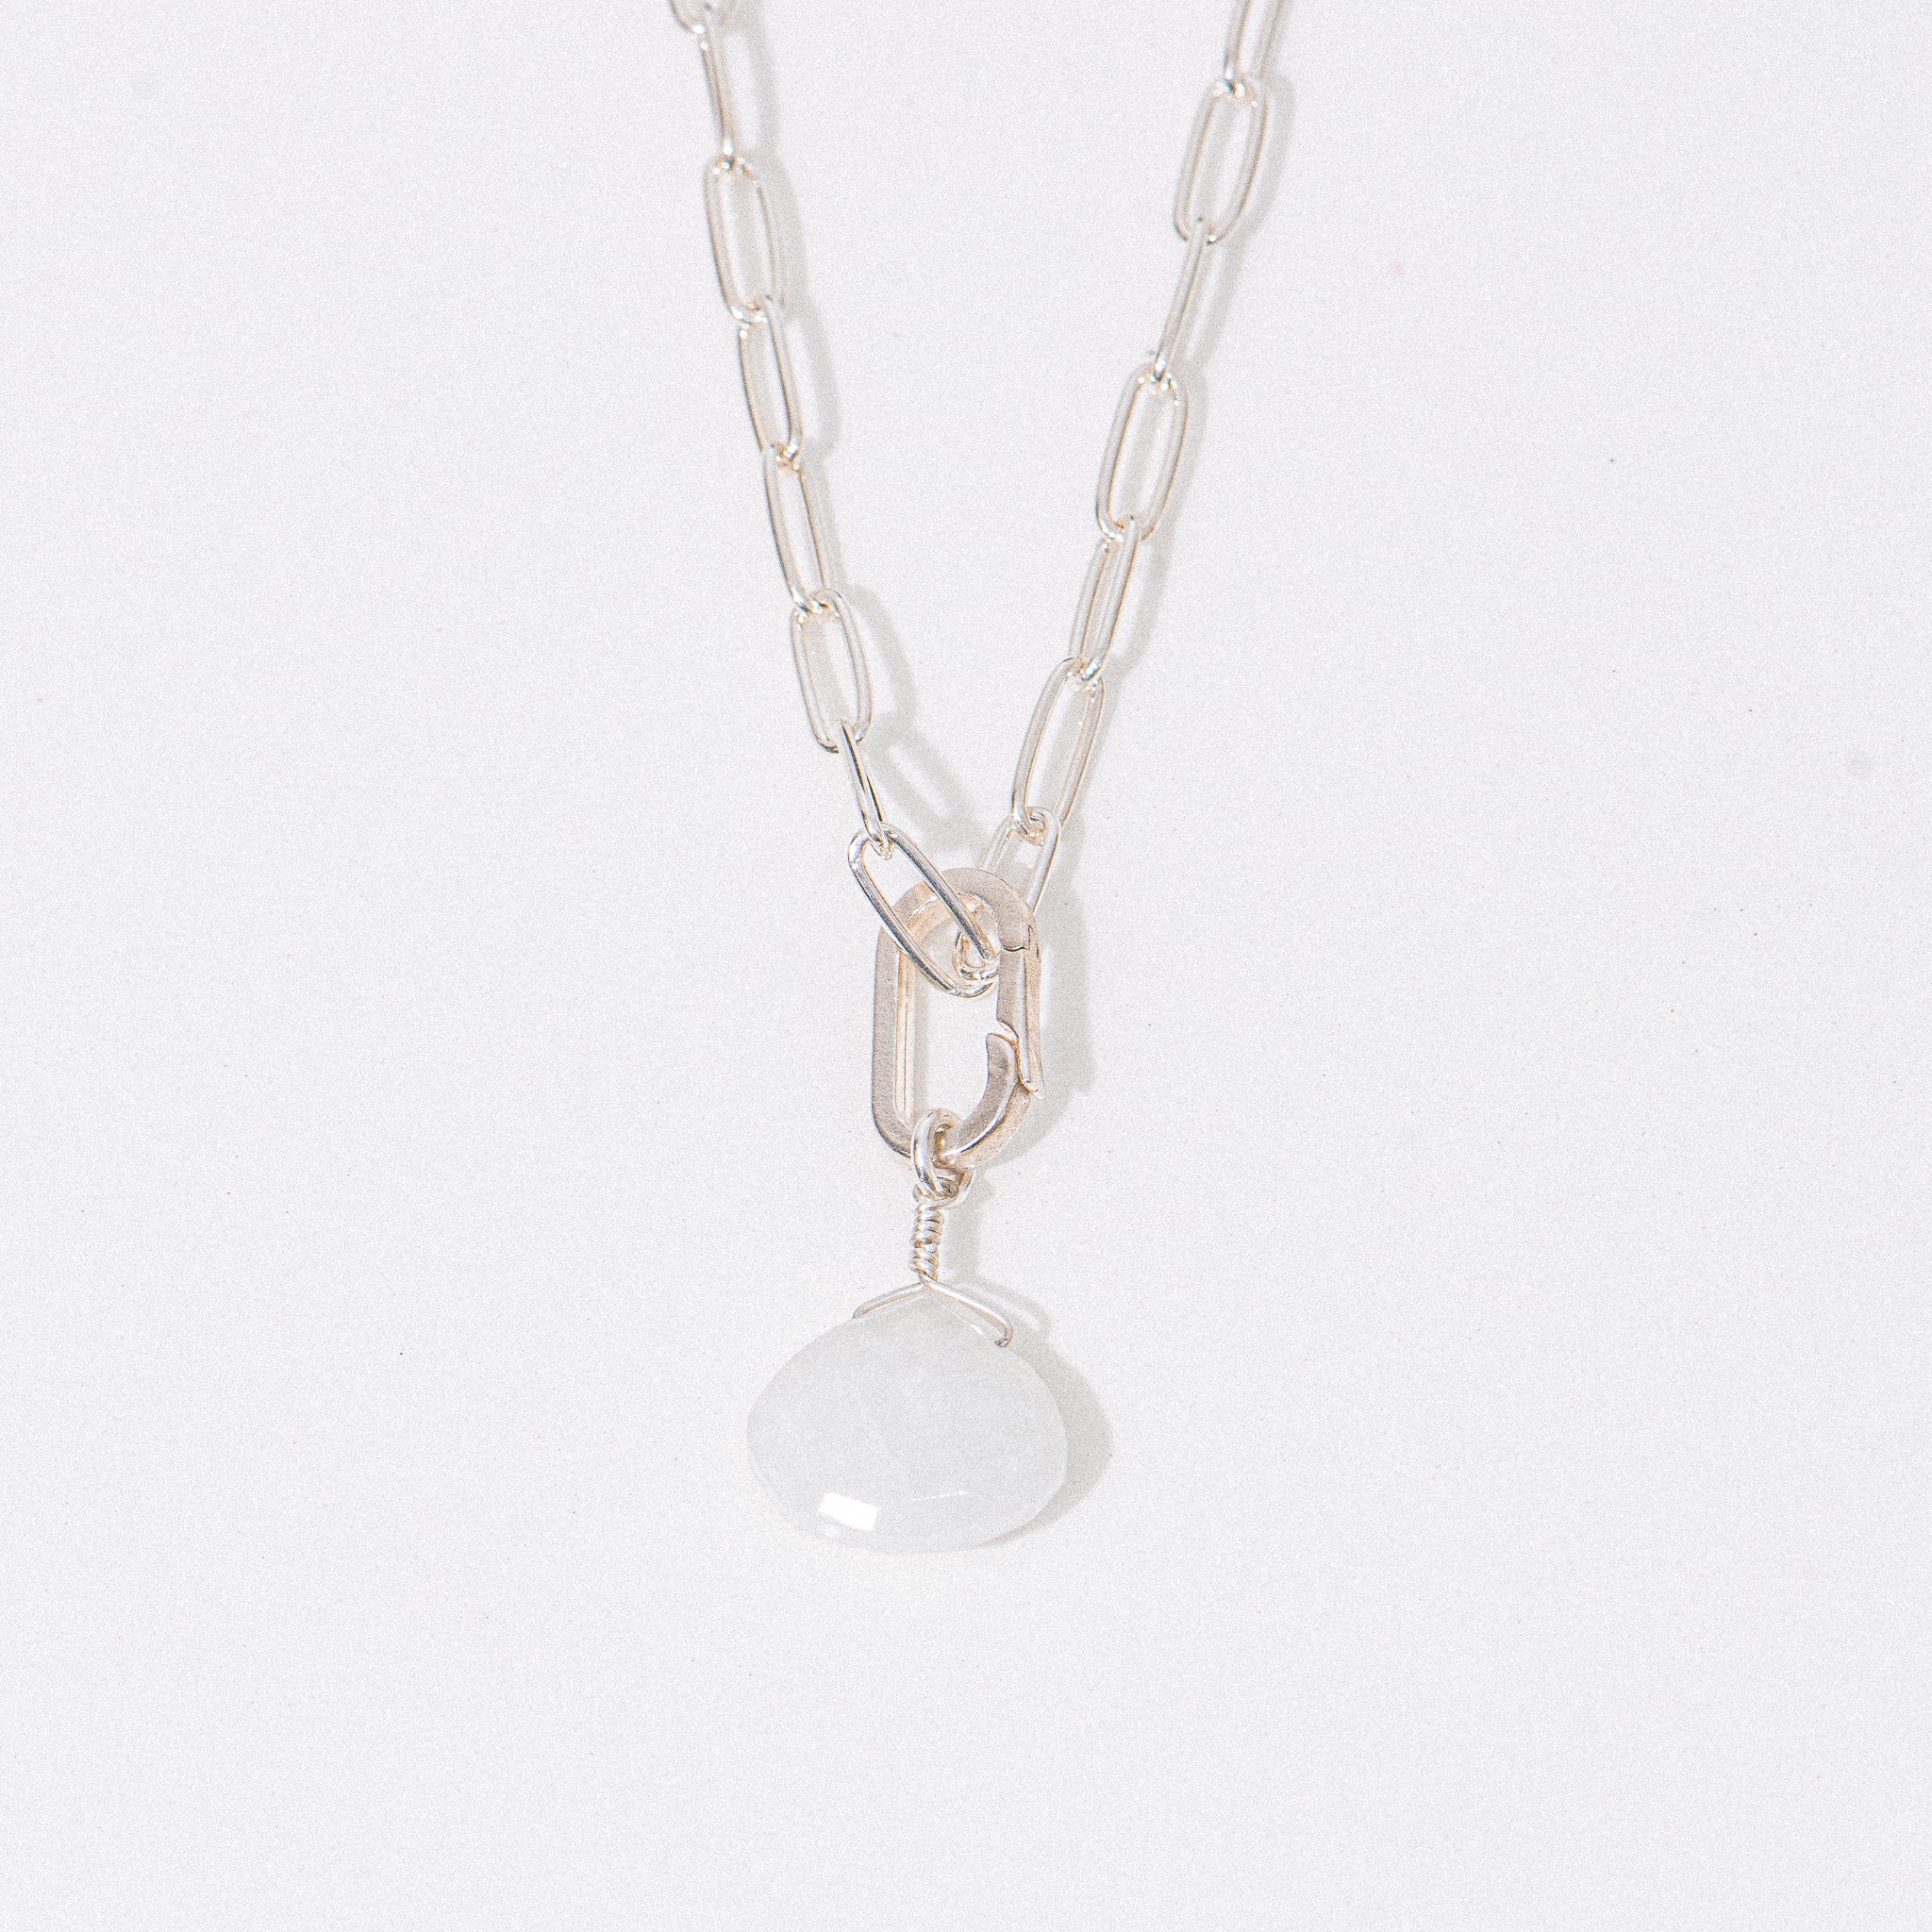 Silver Moonstone Bail Necklace